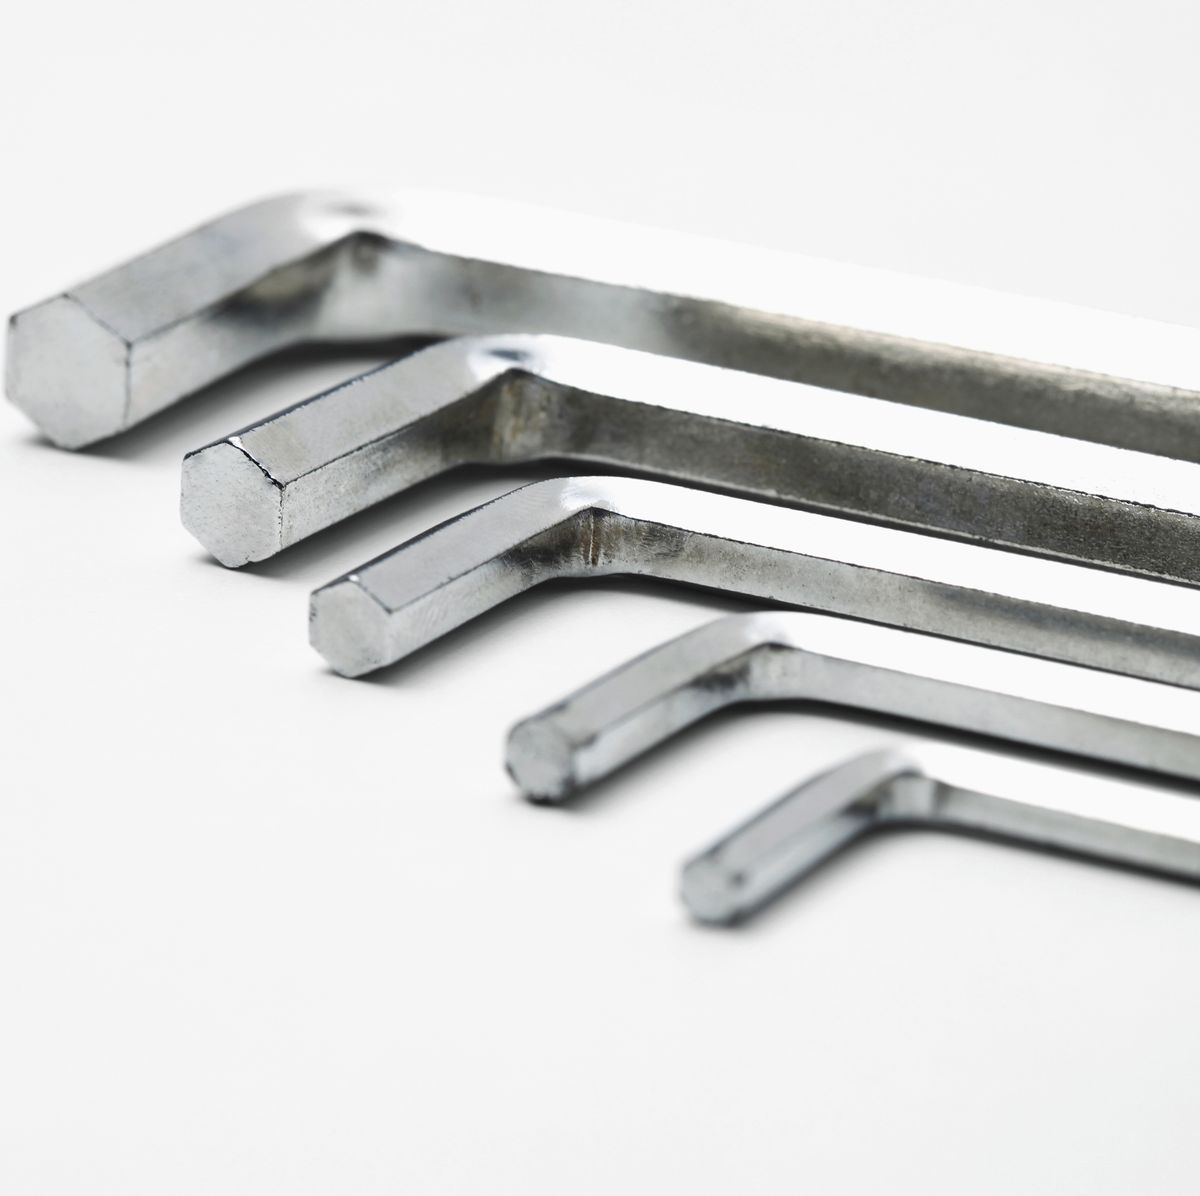 Is a hex key and Allen wrench the same thing? - Quora